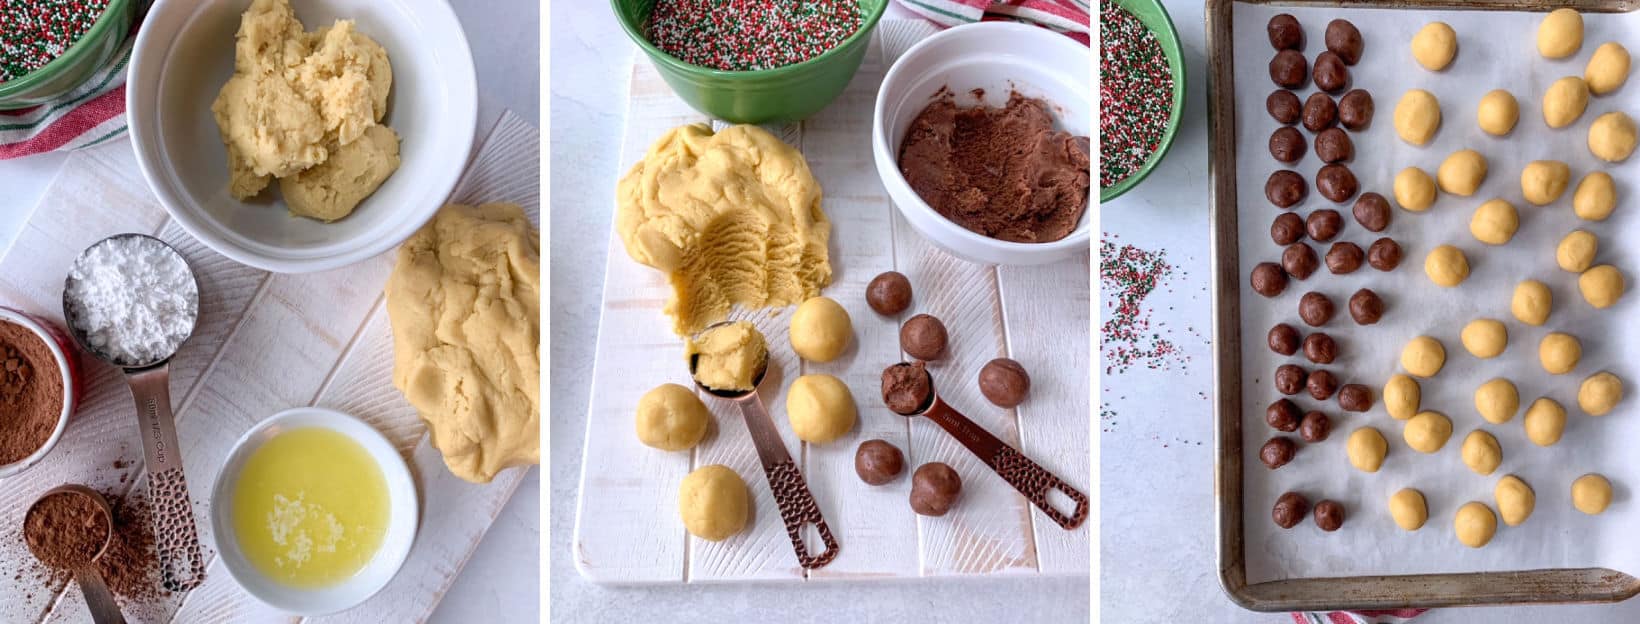 ingredients to make chocolate dough and dough balls